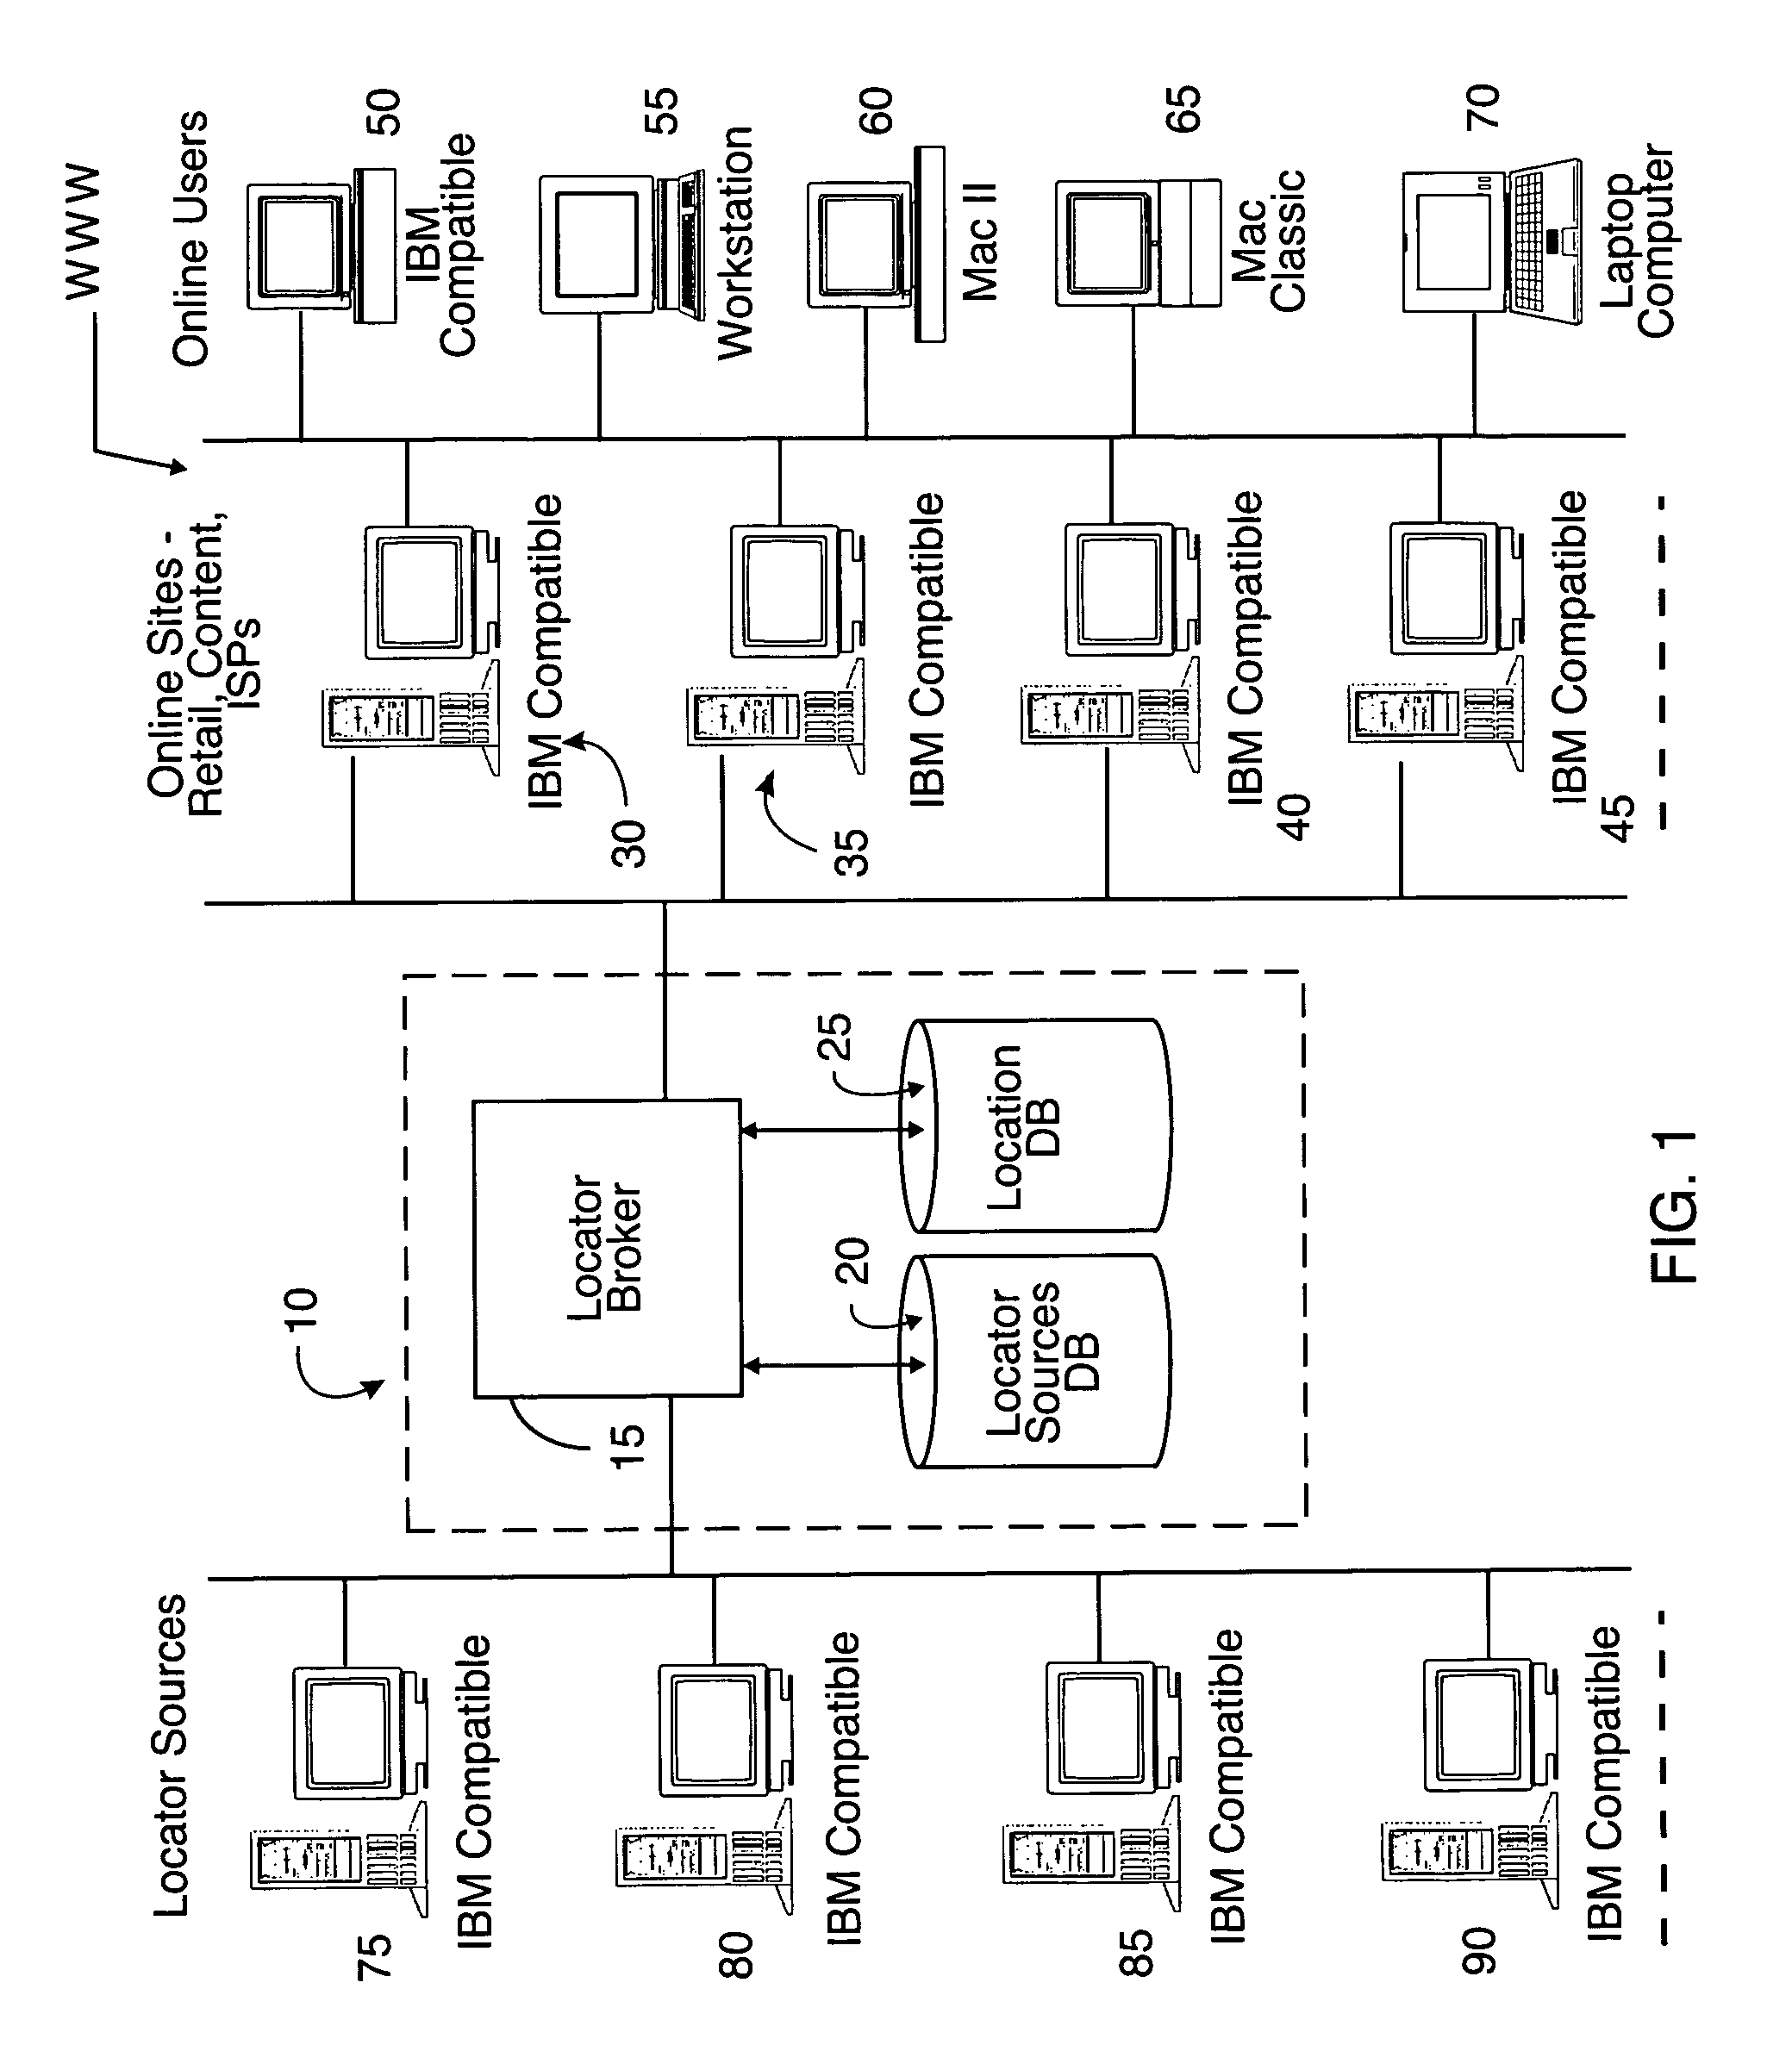 System and method for determining network users' physical locations